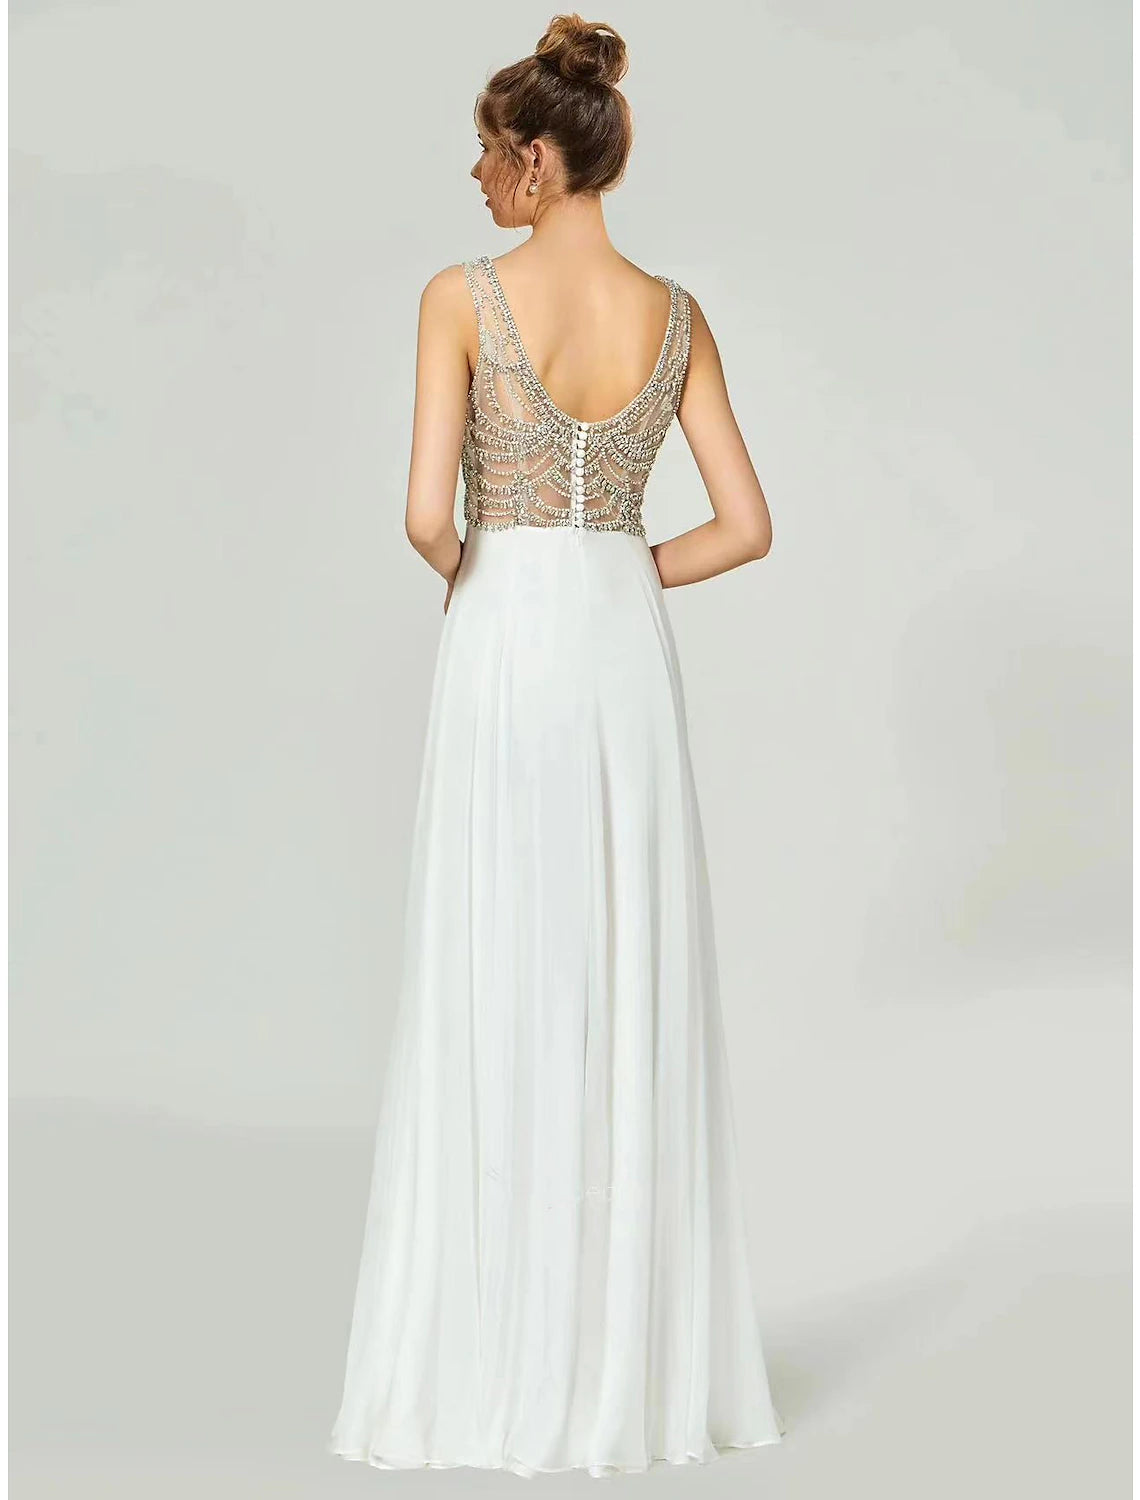 A-Line Evening Gown Open Back Dress Formal Wedding Party Floor Length Sleeveless V Neck Chiffon with Rhinestone